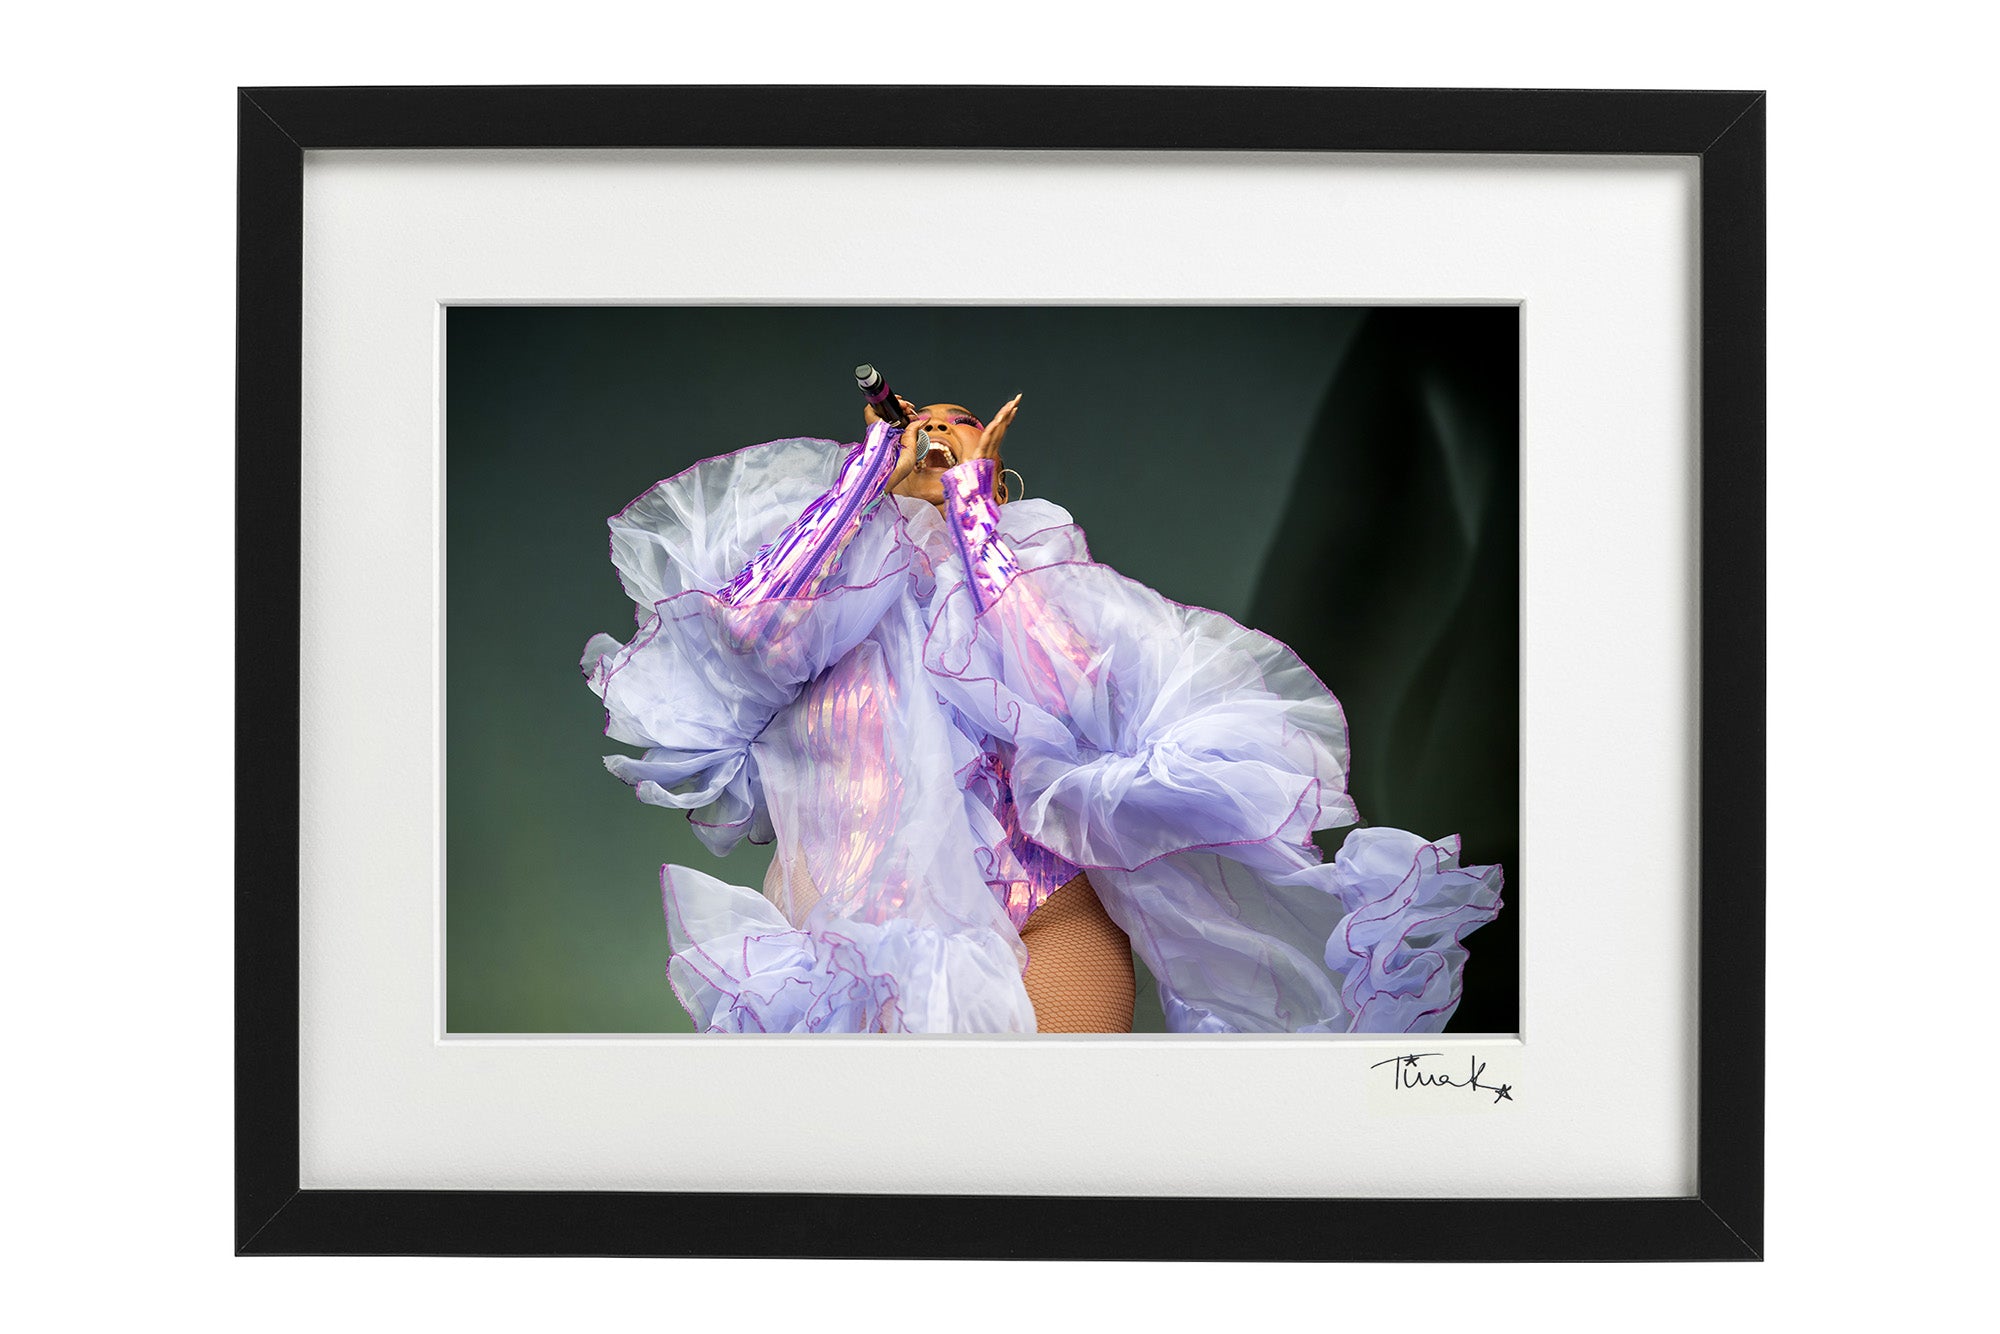 Framed print of Lizzo on stage at Glastonbury, 2019 in a metallic purple bodysuit and sheer scarf